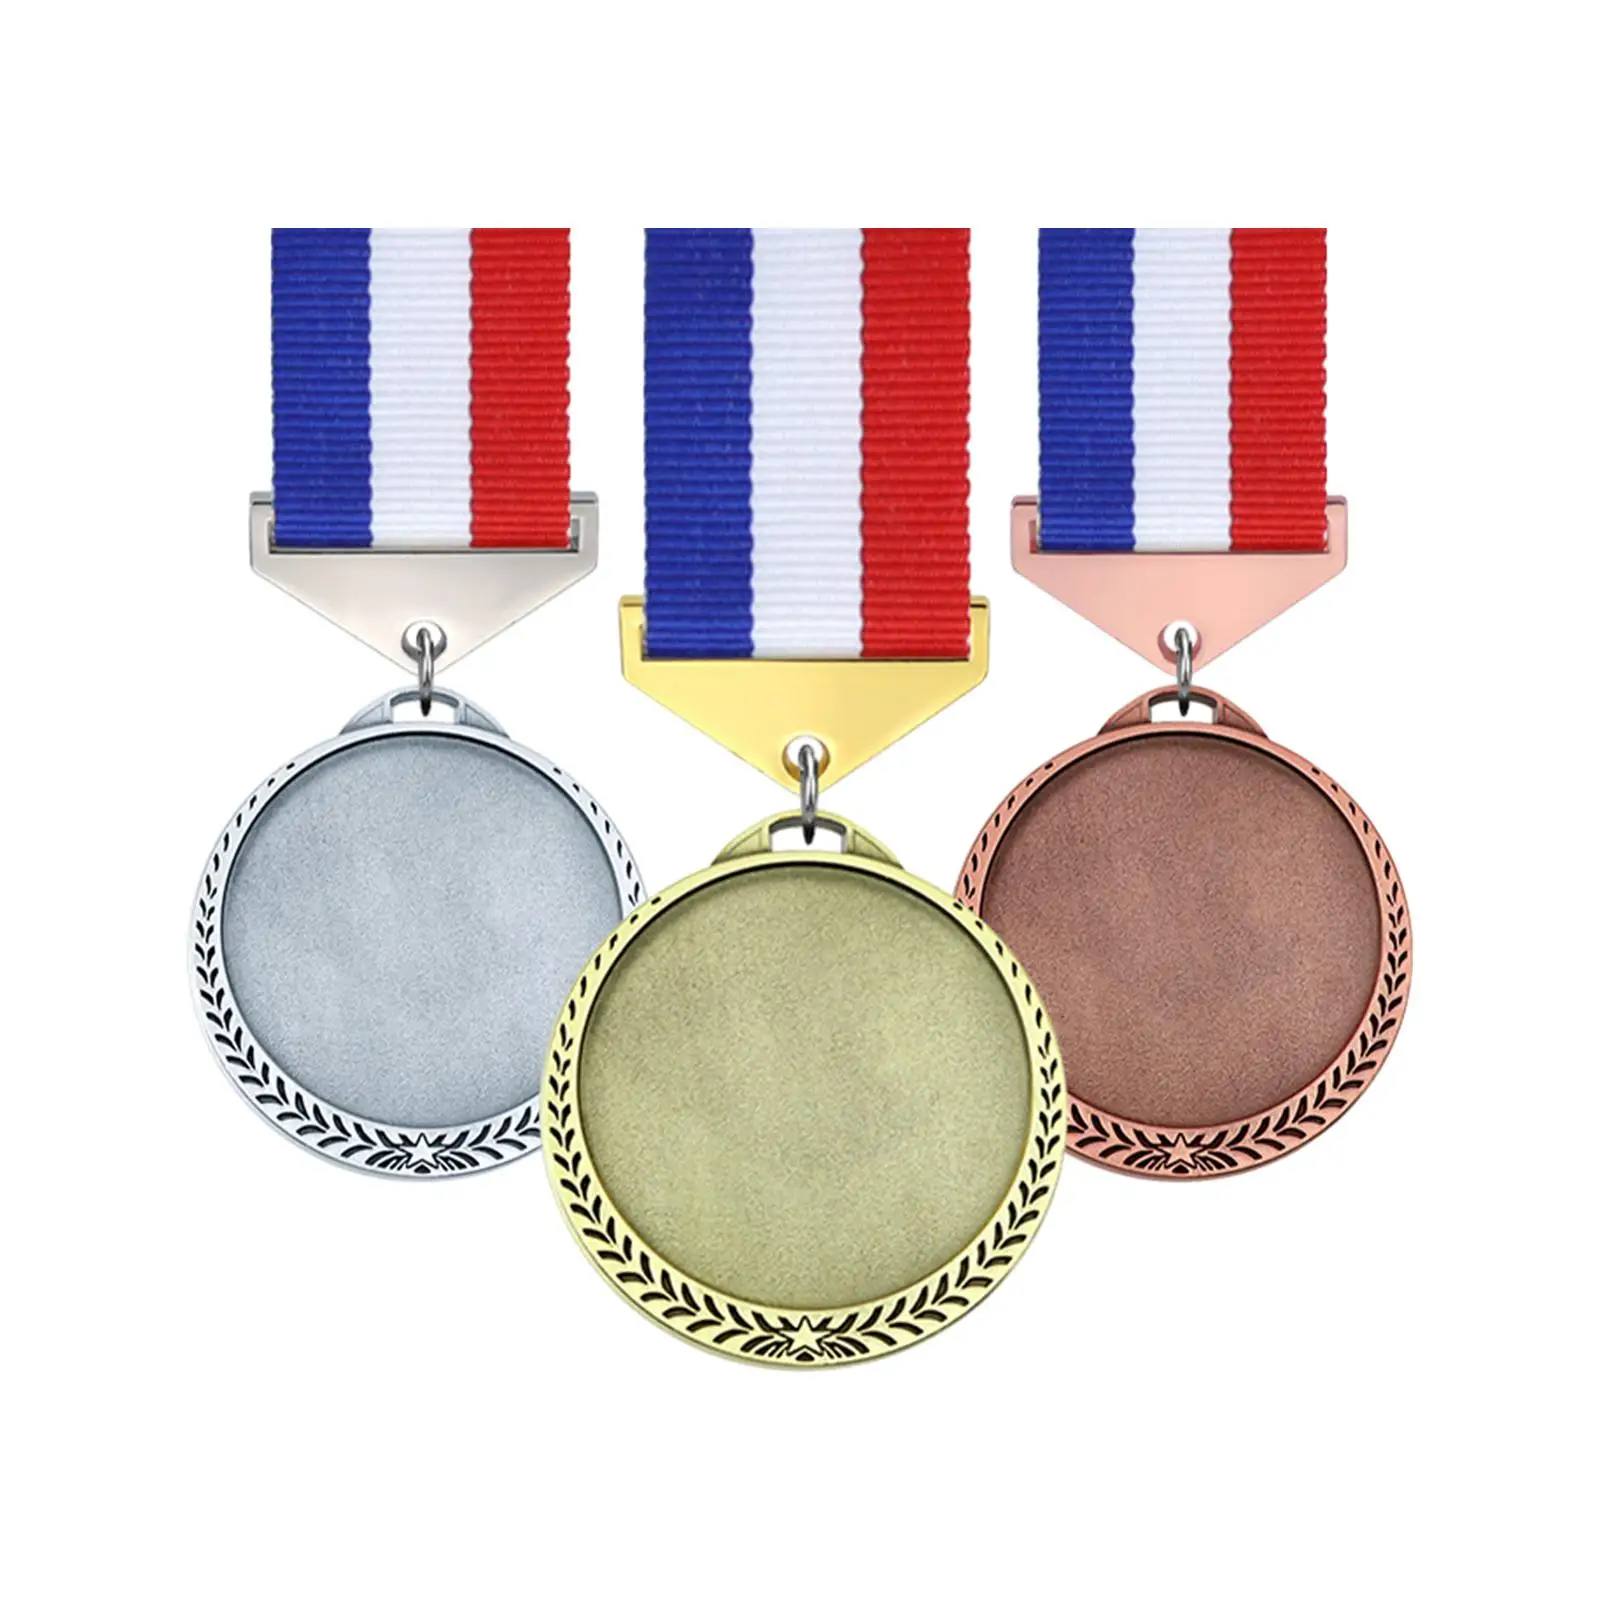 3 Pieces Metal Medals Zinc Alloy for Kids Adults Participation Awards with Ribbons for Games Events Party Soccer Baseball